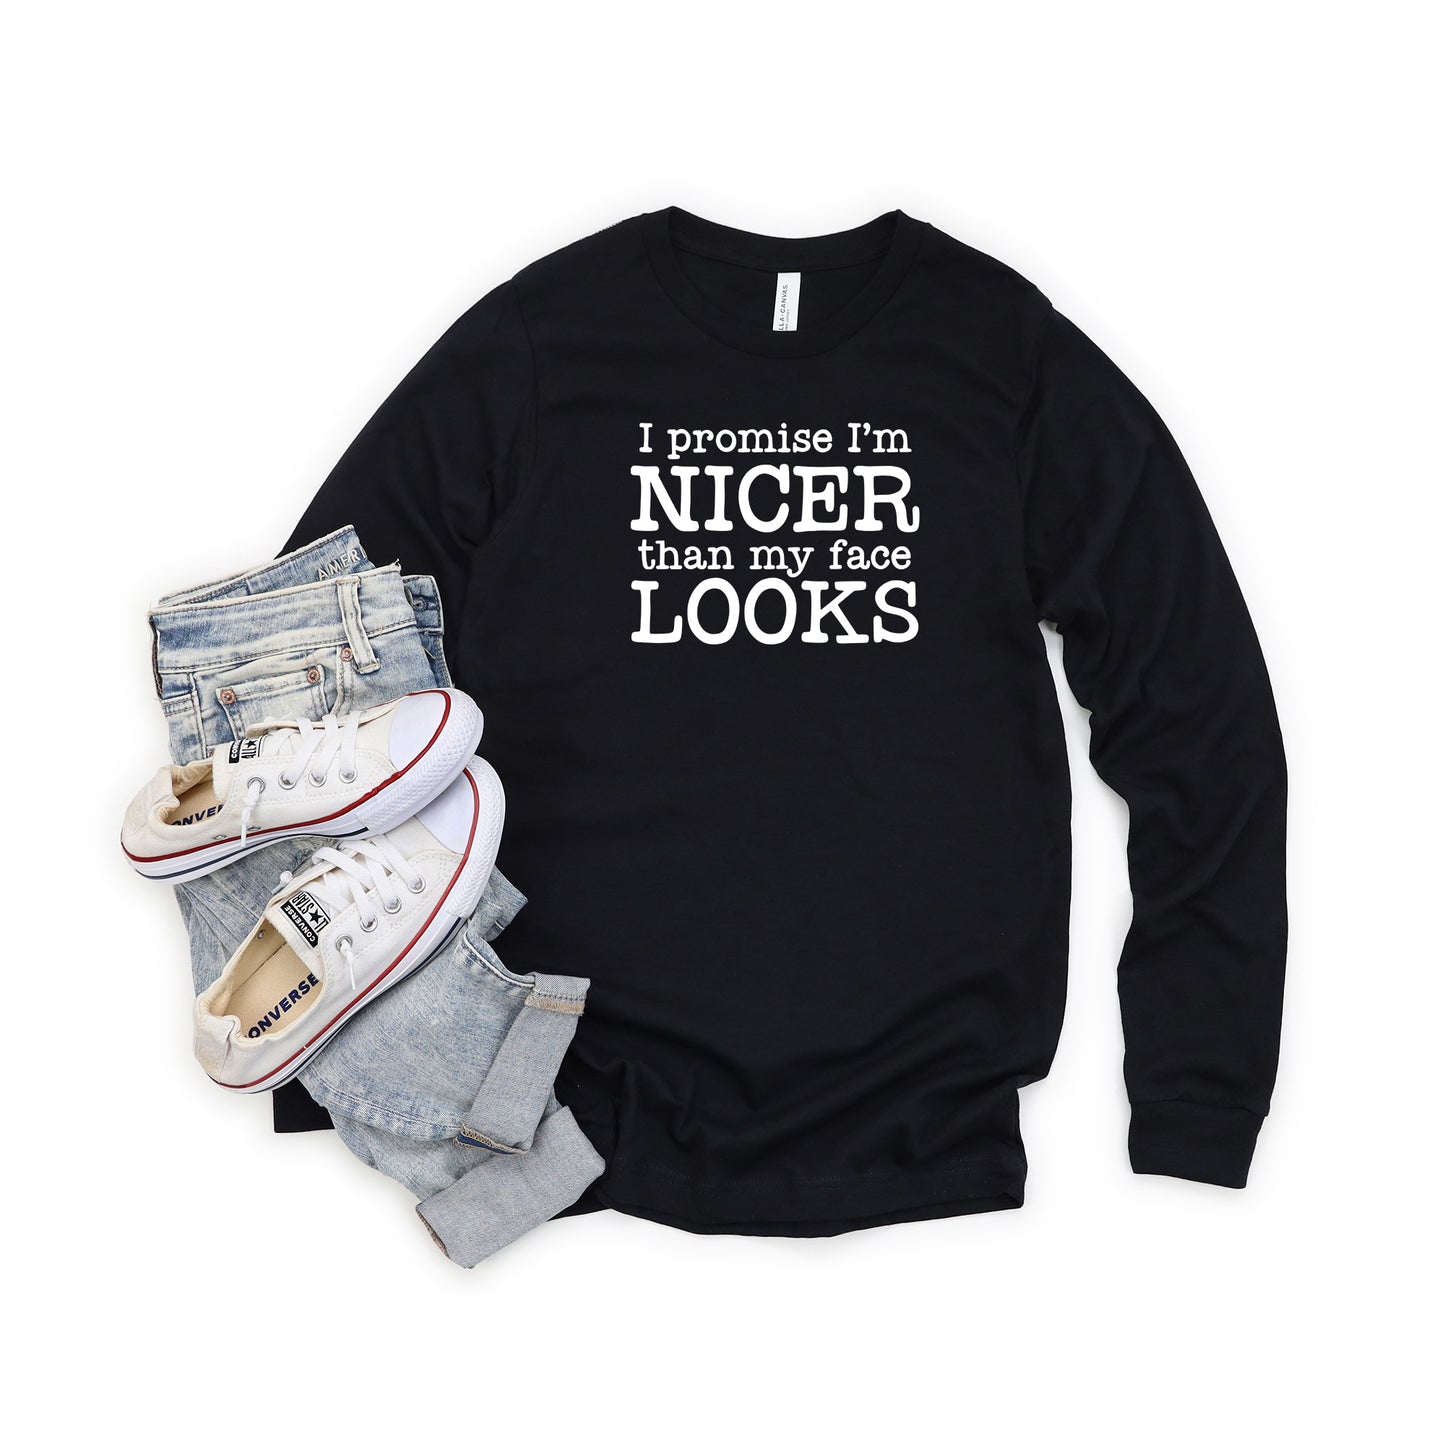 I'm Nicer Than My Face Looks | Long Sleeve Graphic Tee